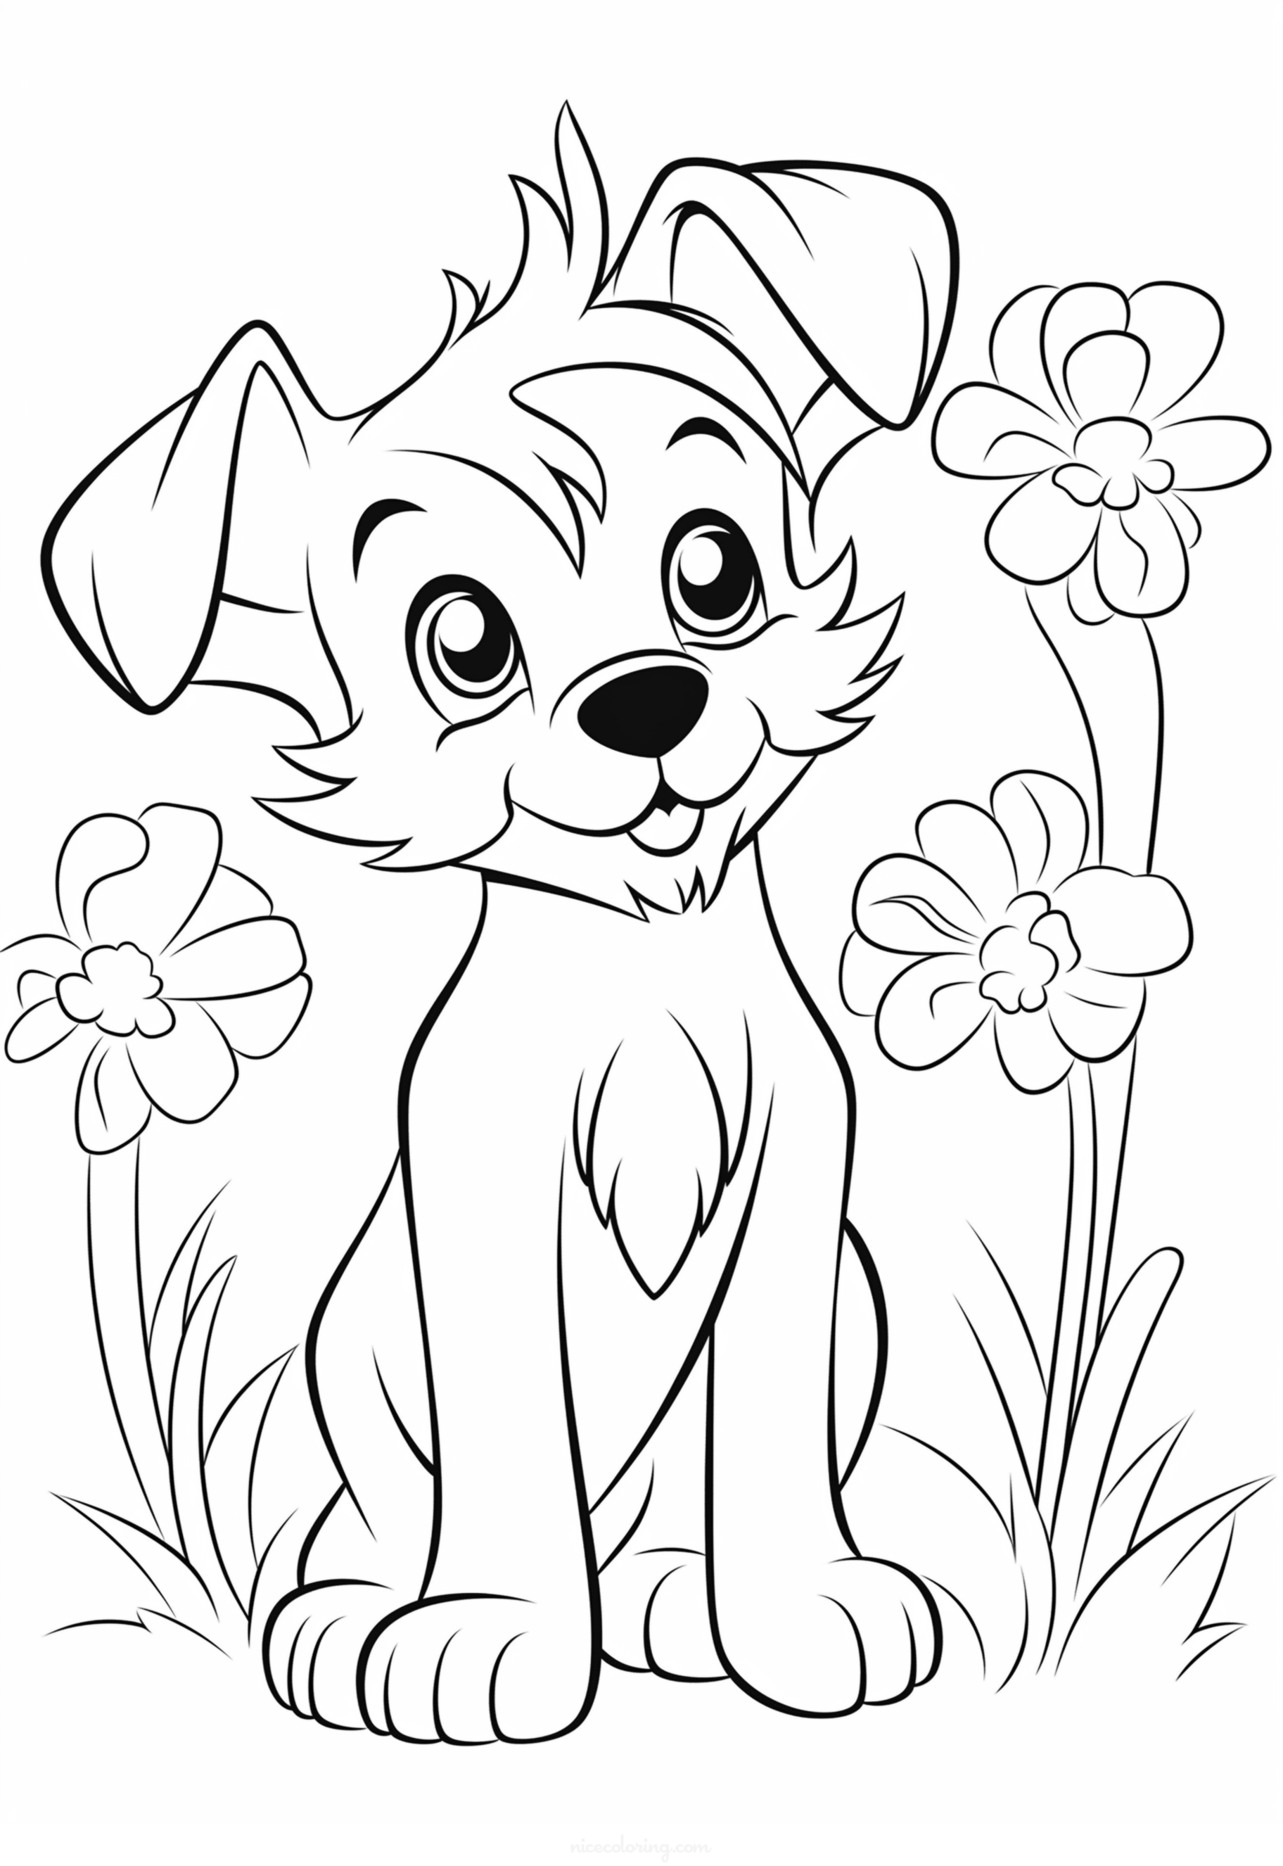 A playful dog waiting to be colored